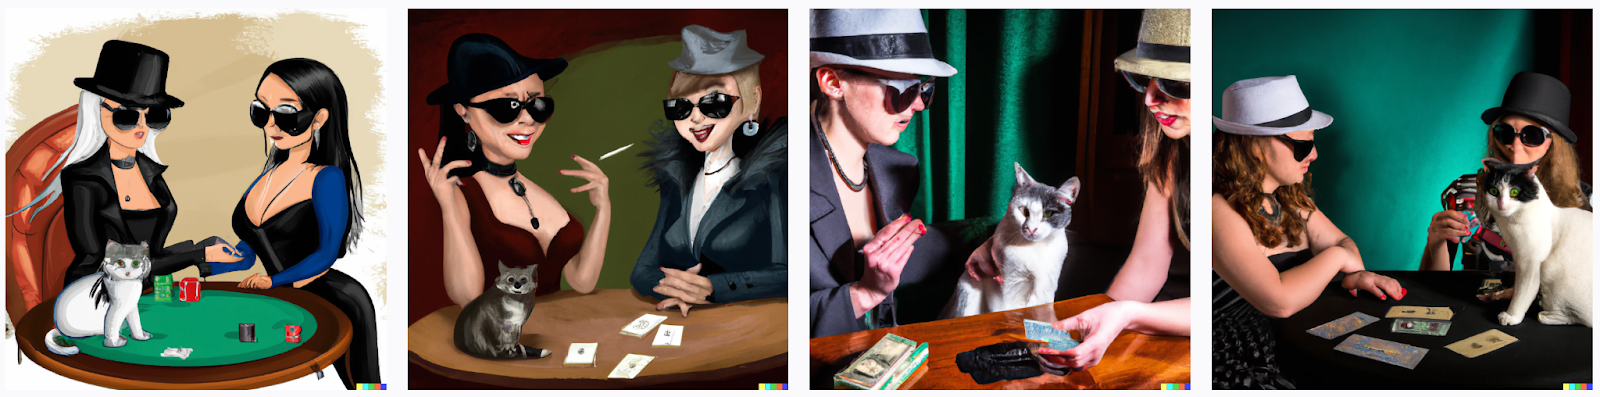 DALL-E 2 results for “A female gangster wears a fedora, a cat wears sunglasses, they talk around a poker table” prompt